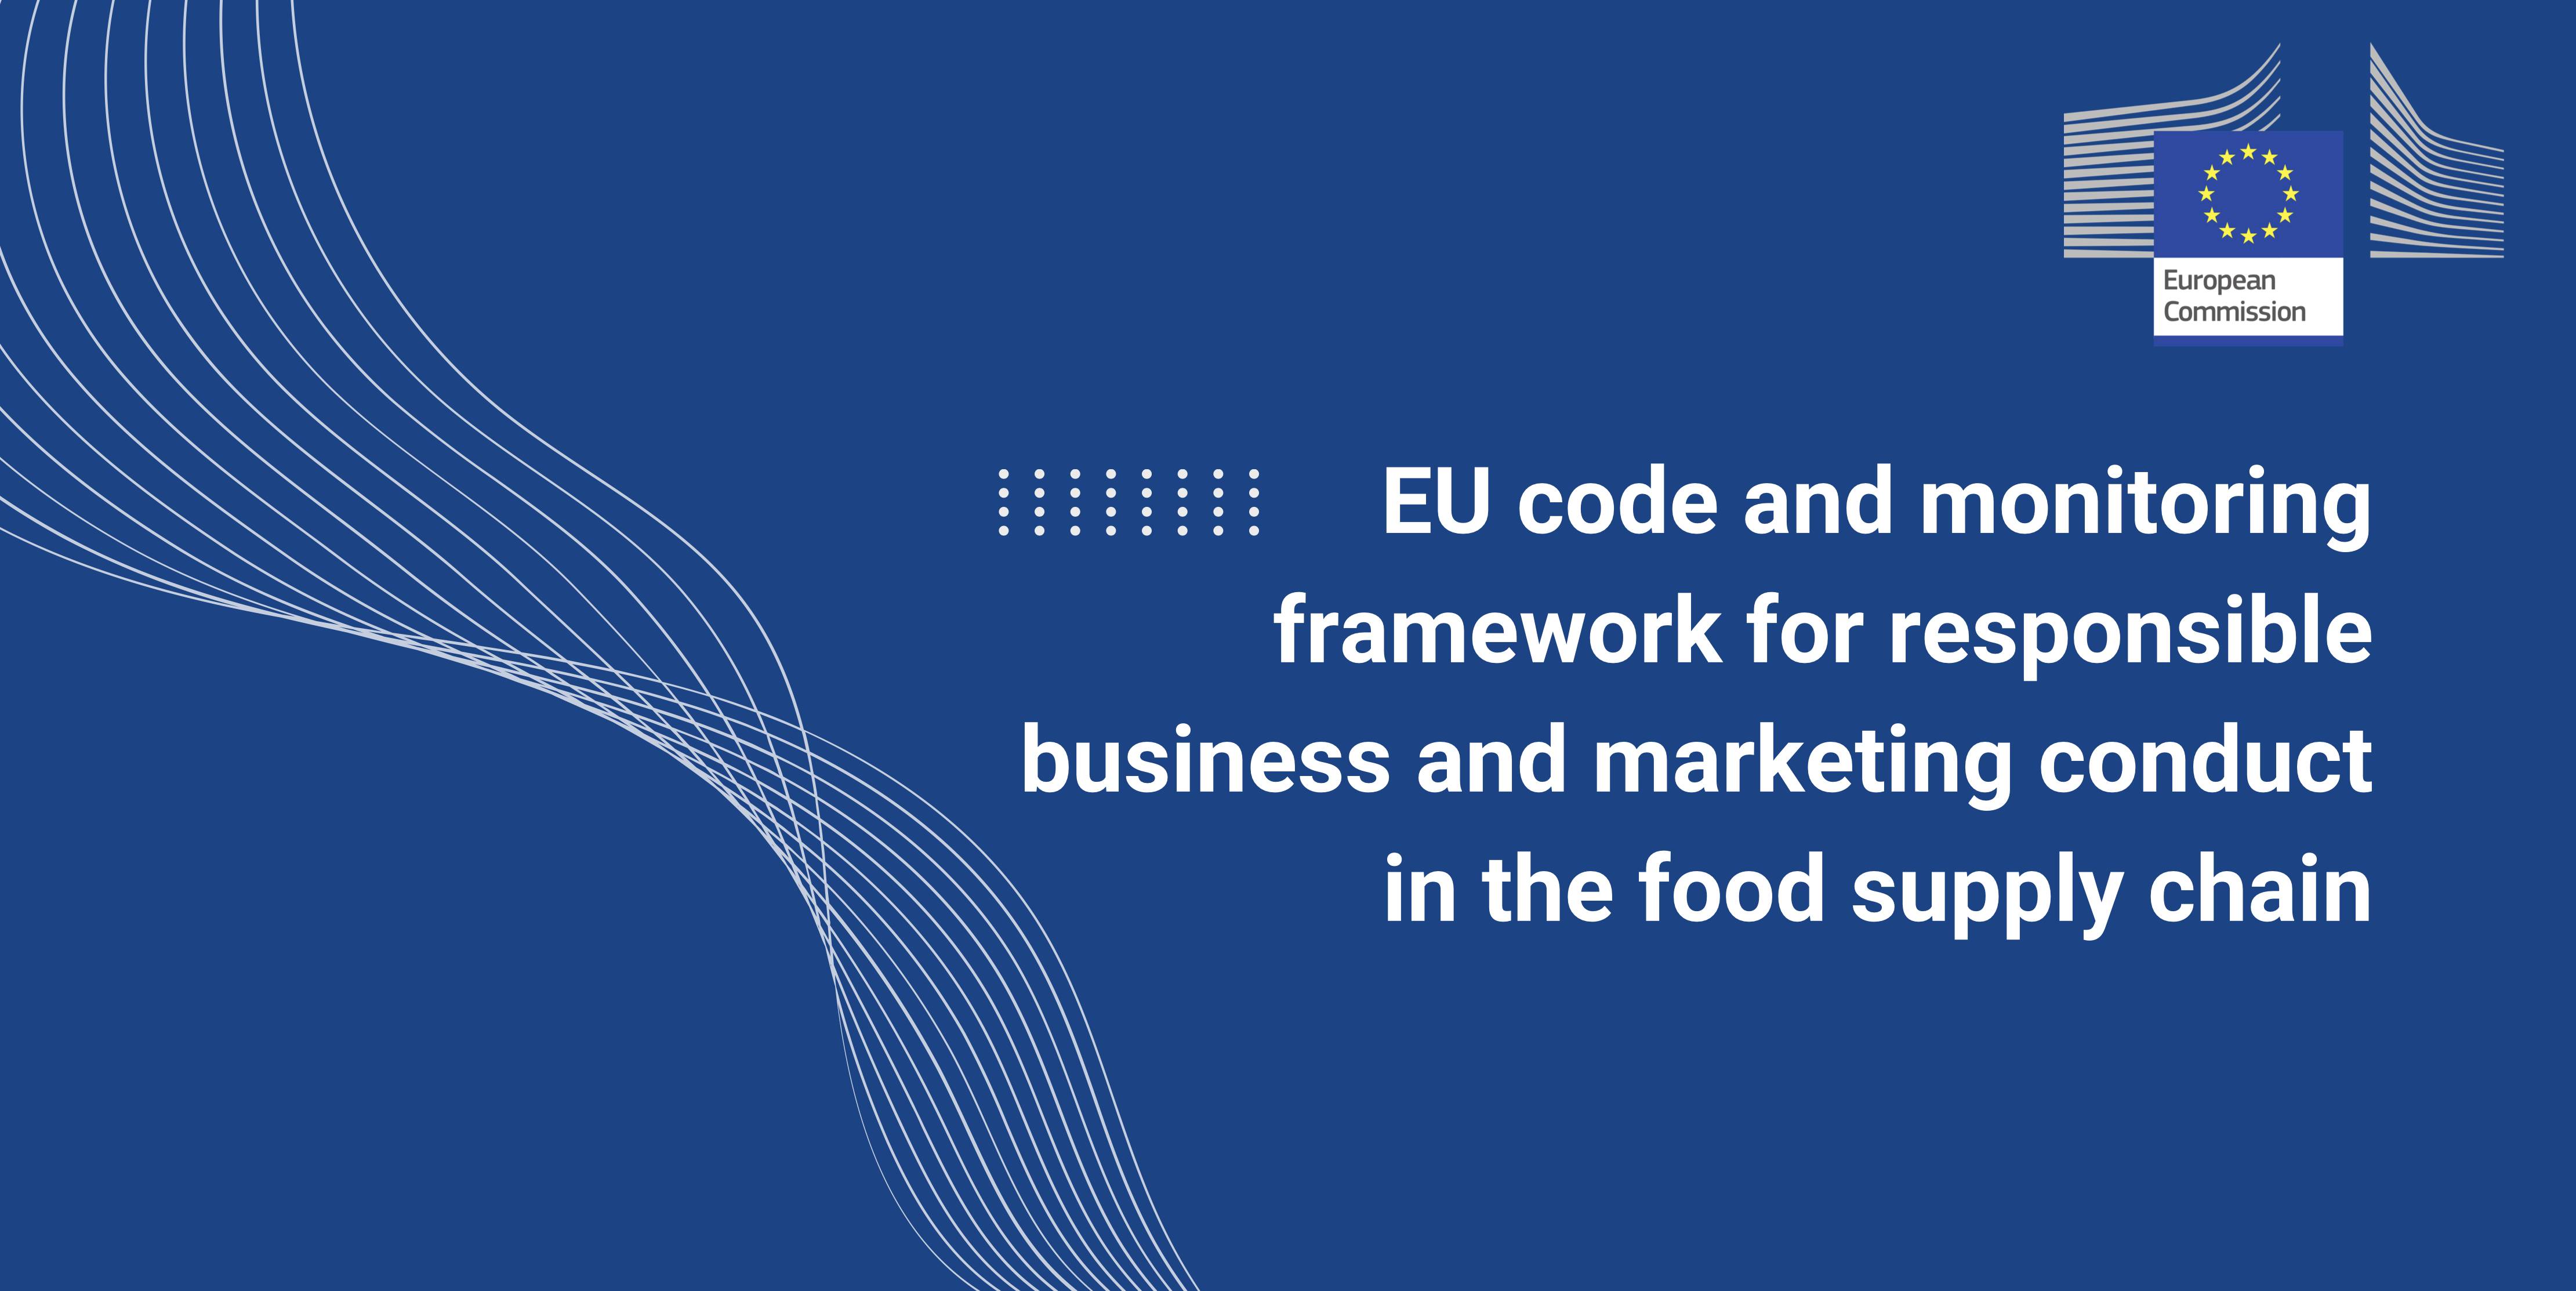 EU code and monitoring framework for responsible business and marketing conduct in the food supply chain